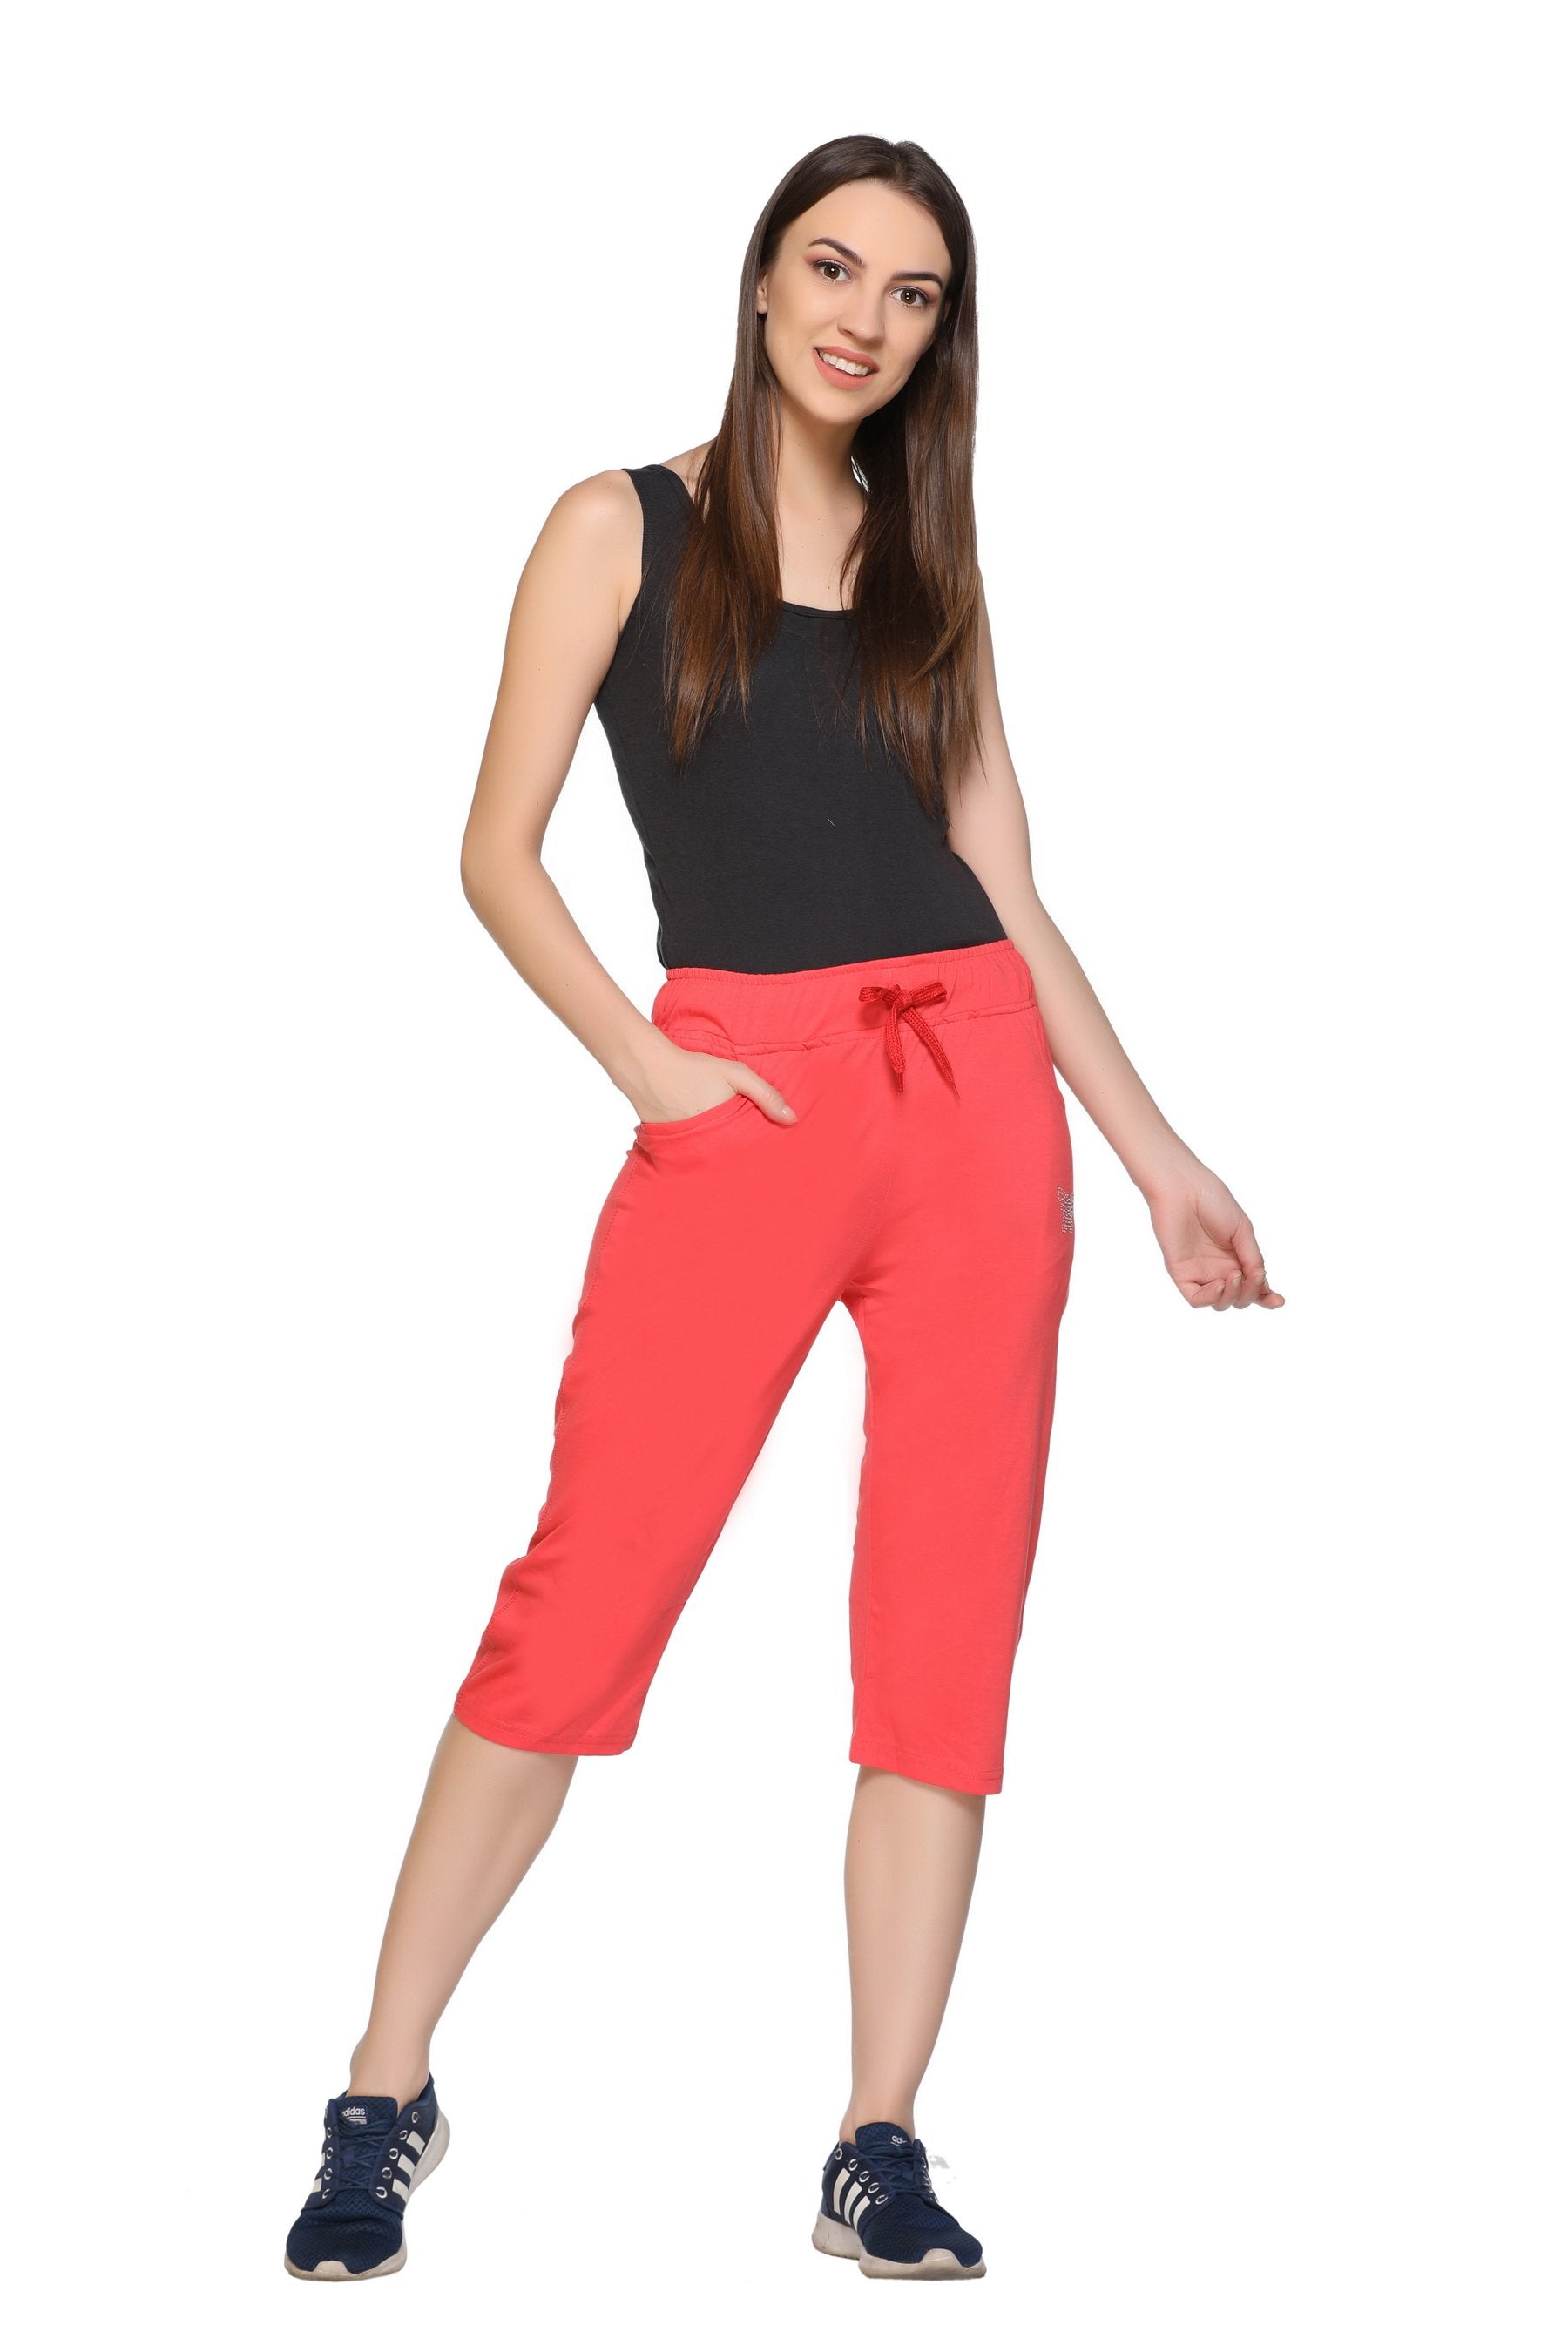 Buy Comfy Red Half Cotton Capri Pants For Women Online In India By  Cupidclothing's